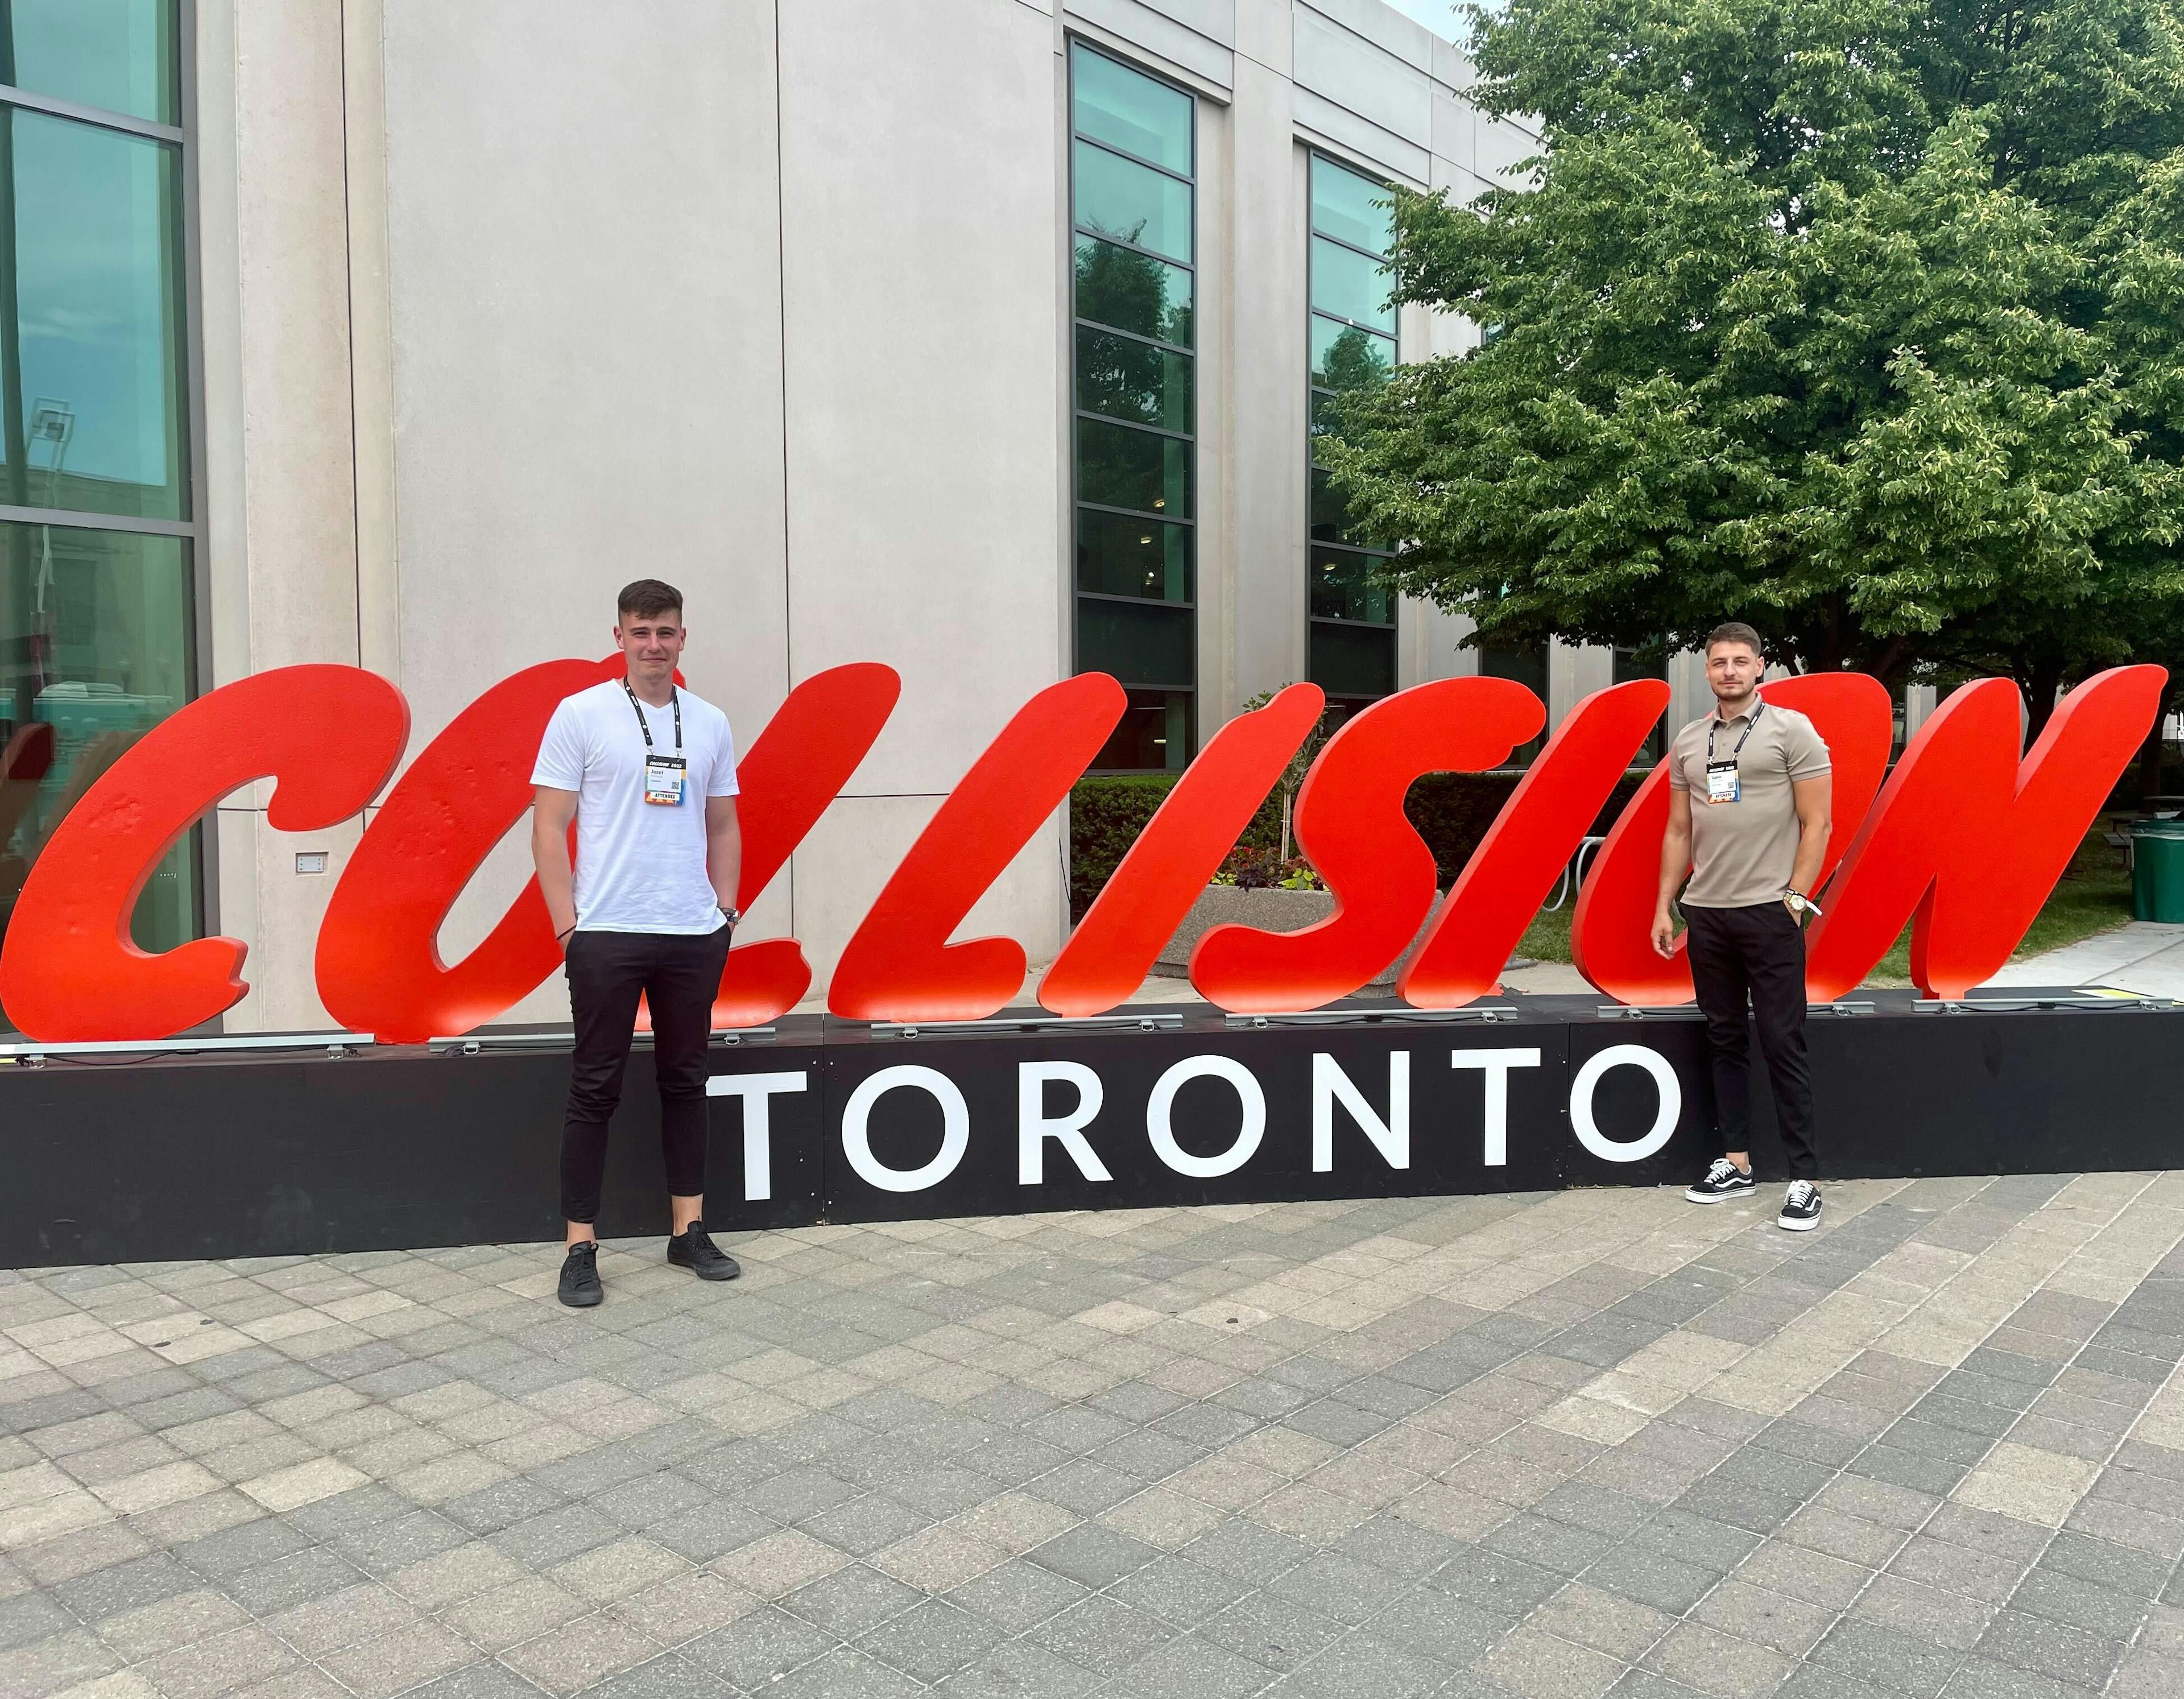 Jozef and Samir attending Collision Conference in Toronto to network with startup founders